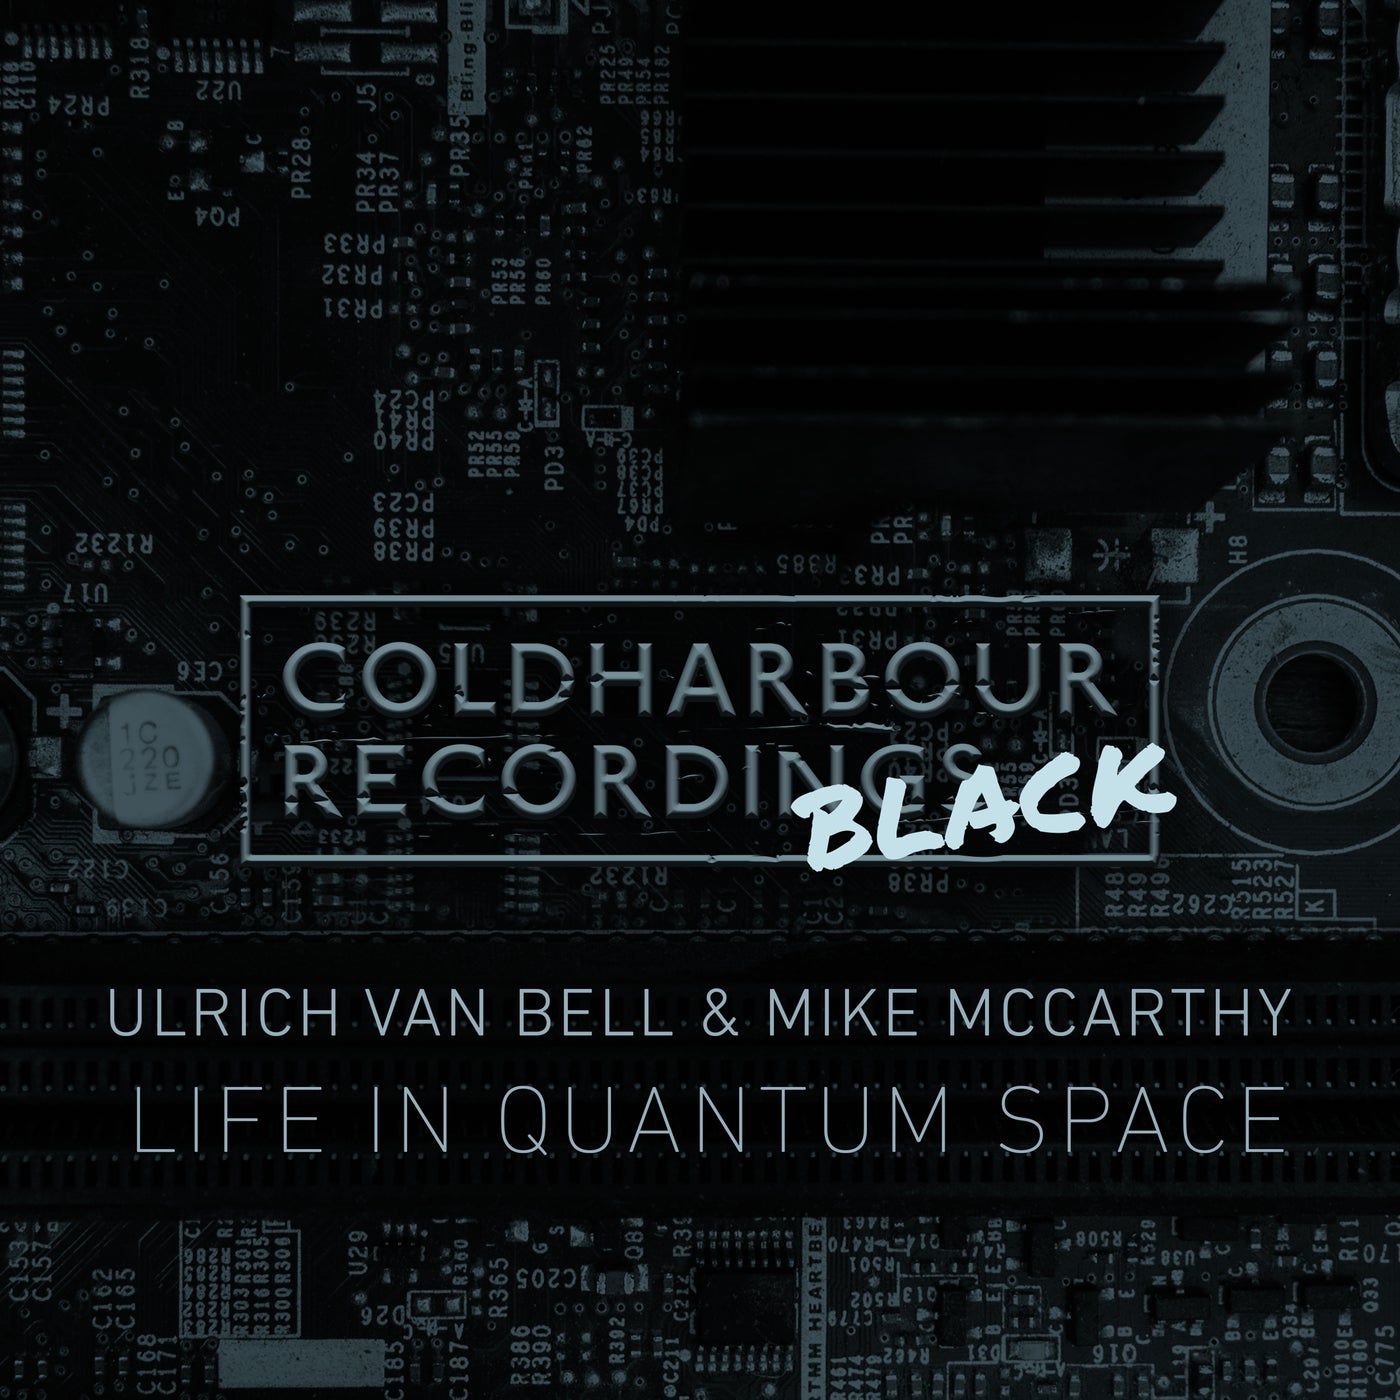 image cover: Ulrich Van Bell, Mike McCarthy - Life in Quantum Space on Coldharbour Black